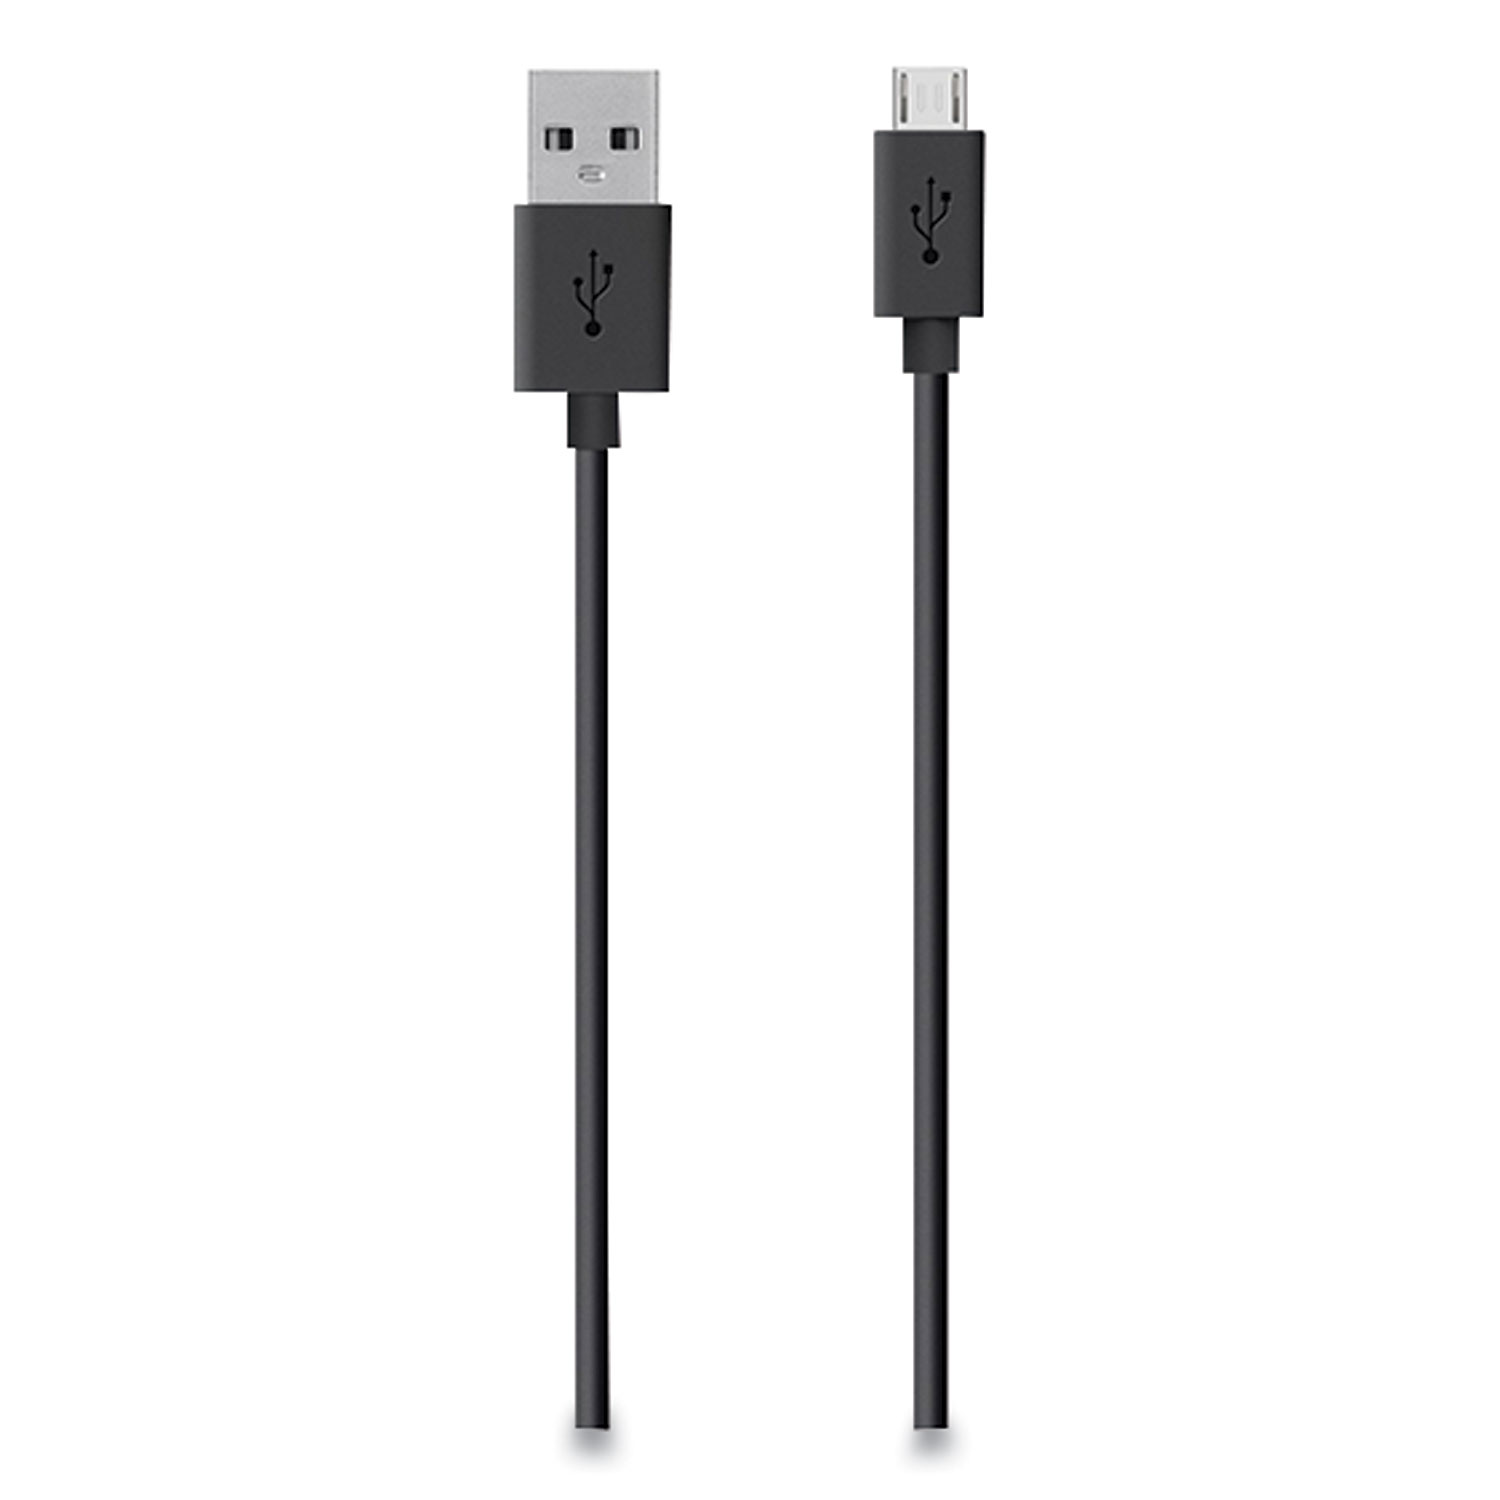  Belkin F2CU012BT04-BLK MIXIT Micro USB ChargeSync Cable, 4 ft, Black (BLK285309) 